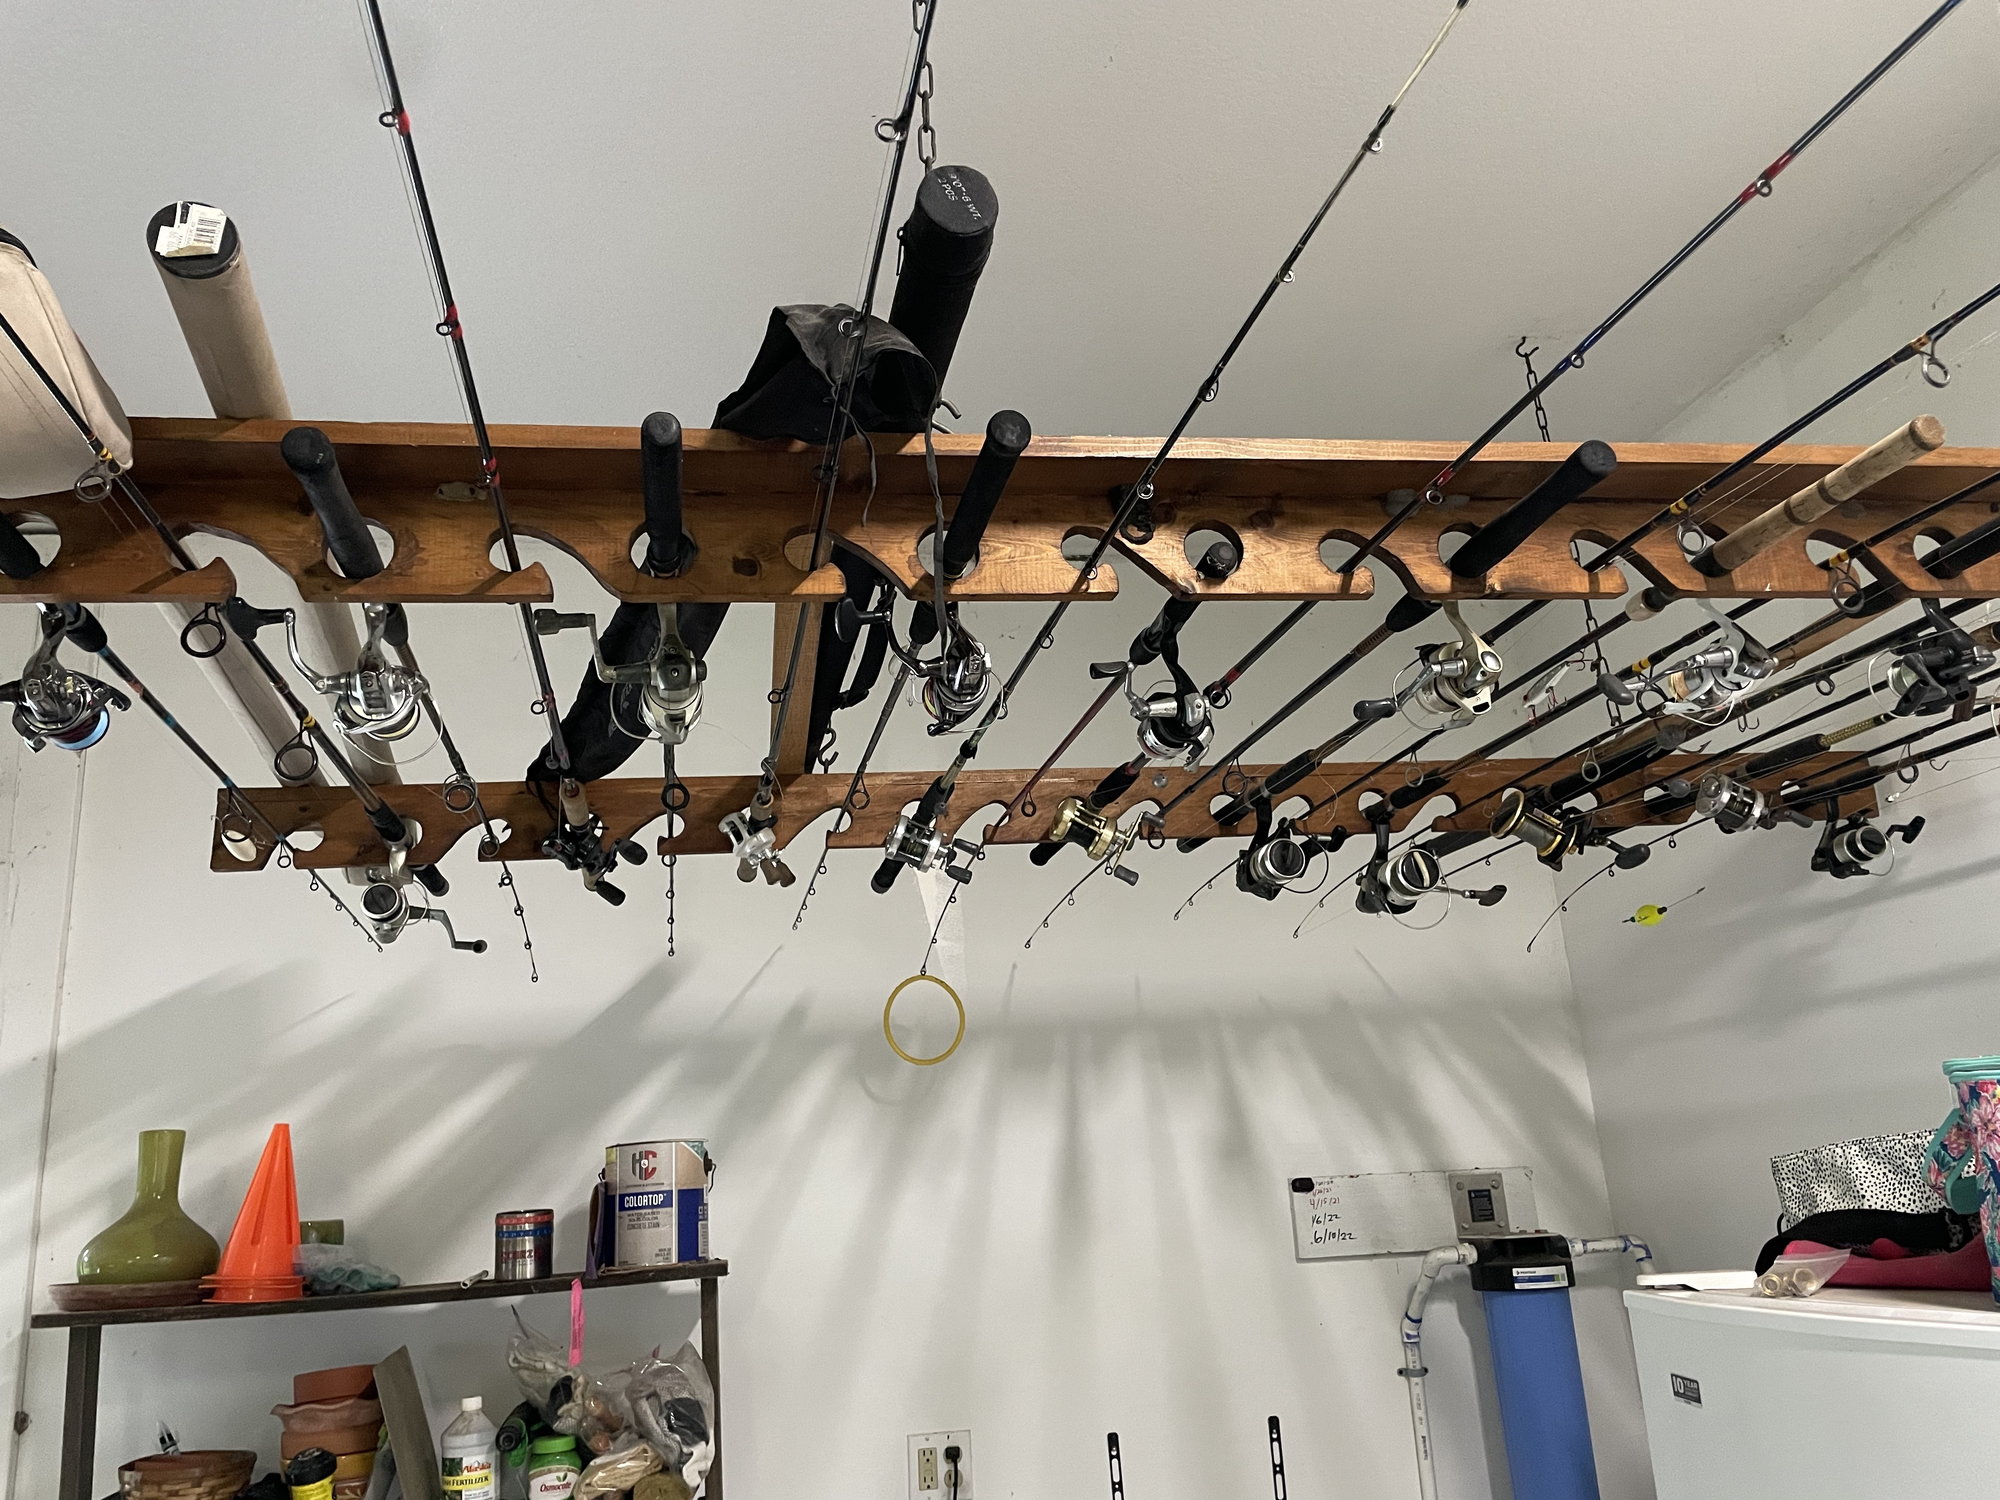 DIY Garage Door Rod Storage - The Hull Truth - Boating and Fishing Forum